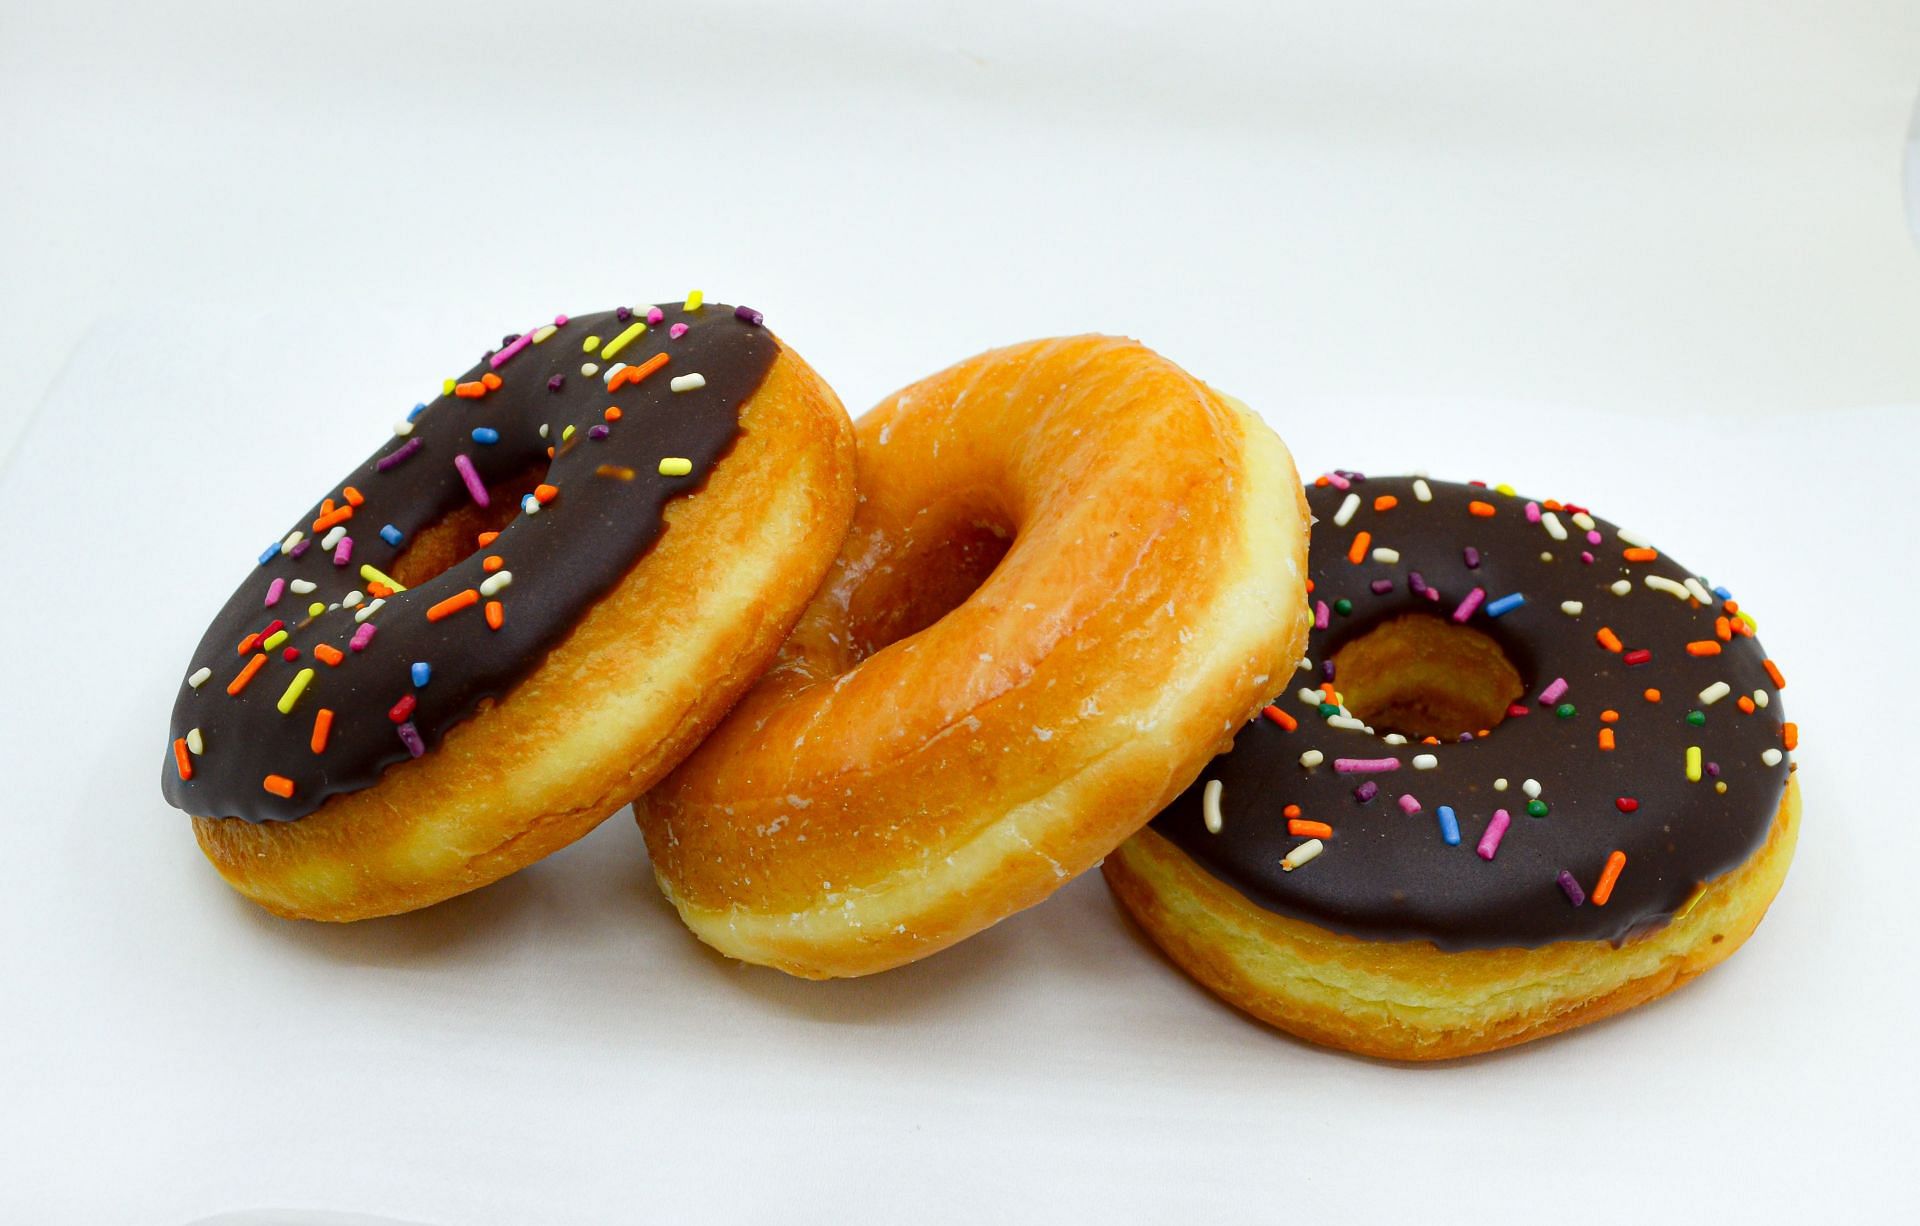 Fried foods like doughnuts can be incredibly unhealthy if you consume them regularly. (Image via Unsplash/Z Graphica)